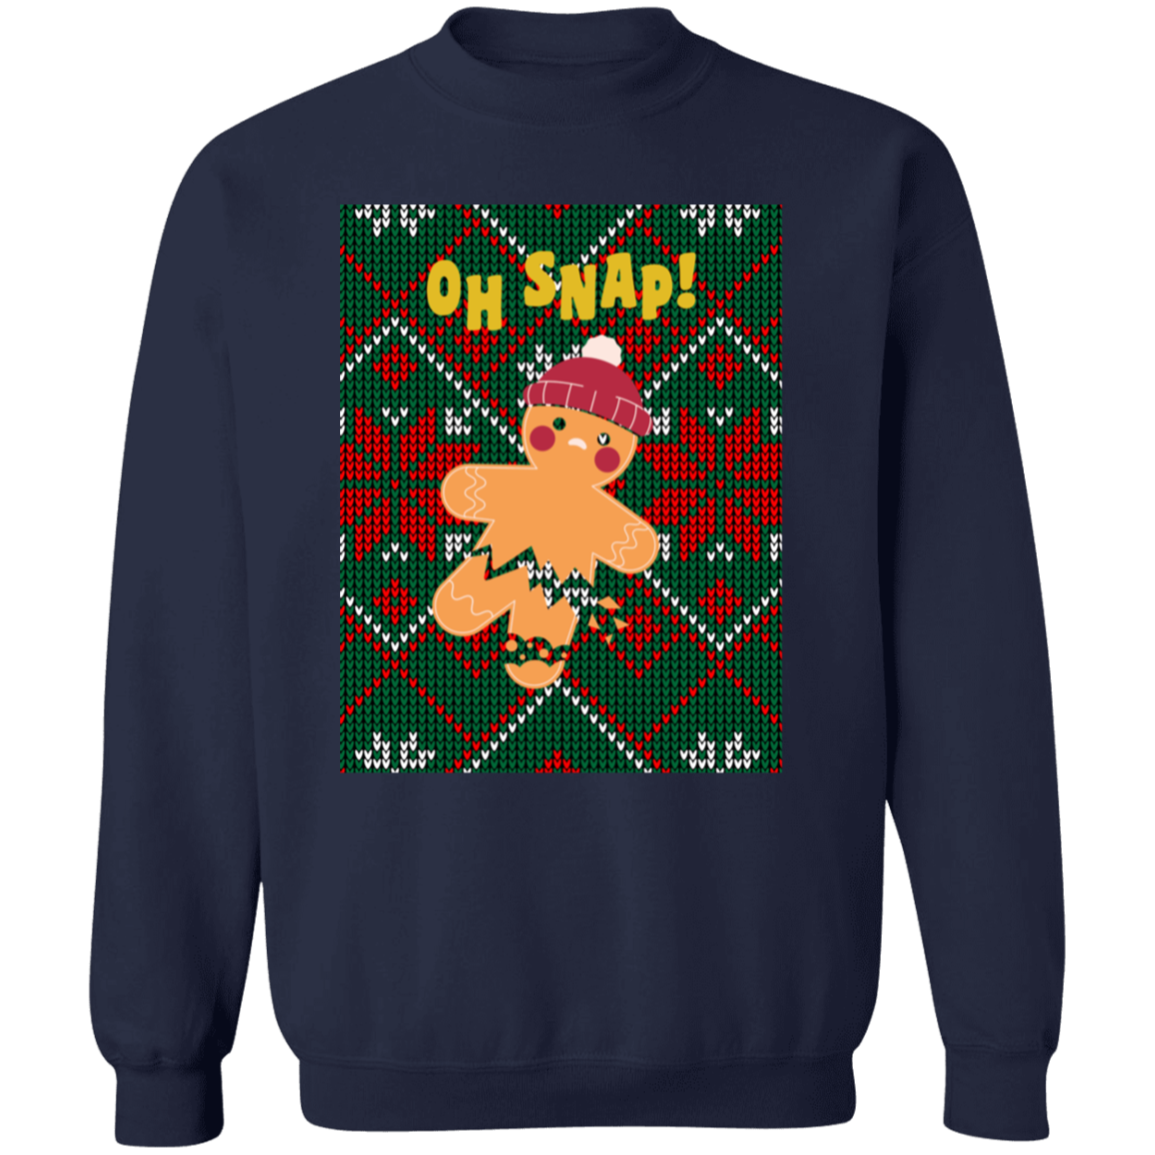 OH SNAP! GINGER BREAD MAN CREWNECK SWEATER